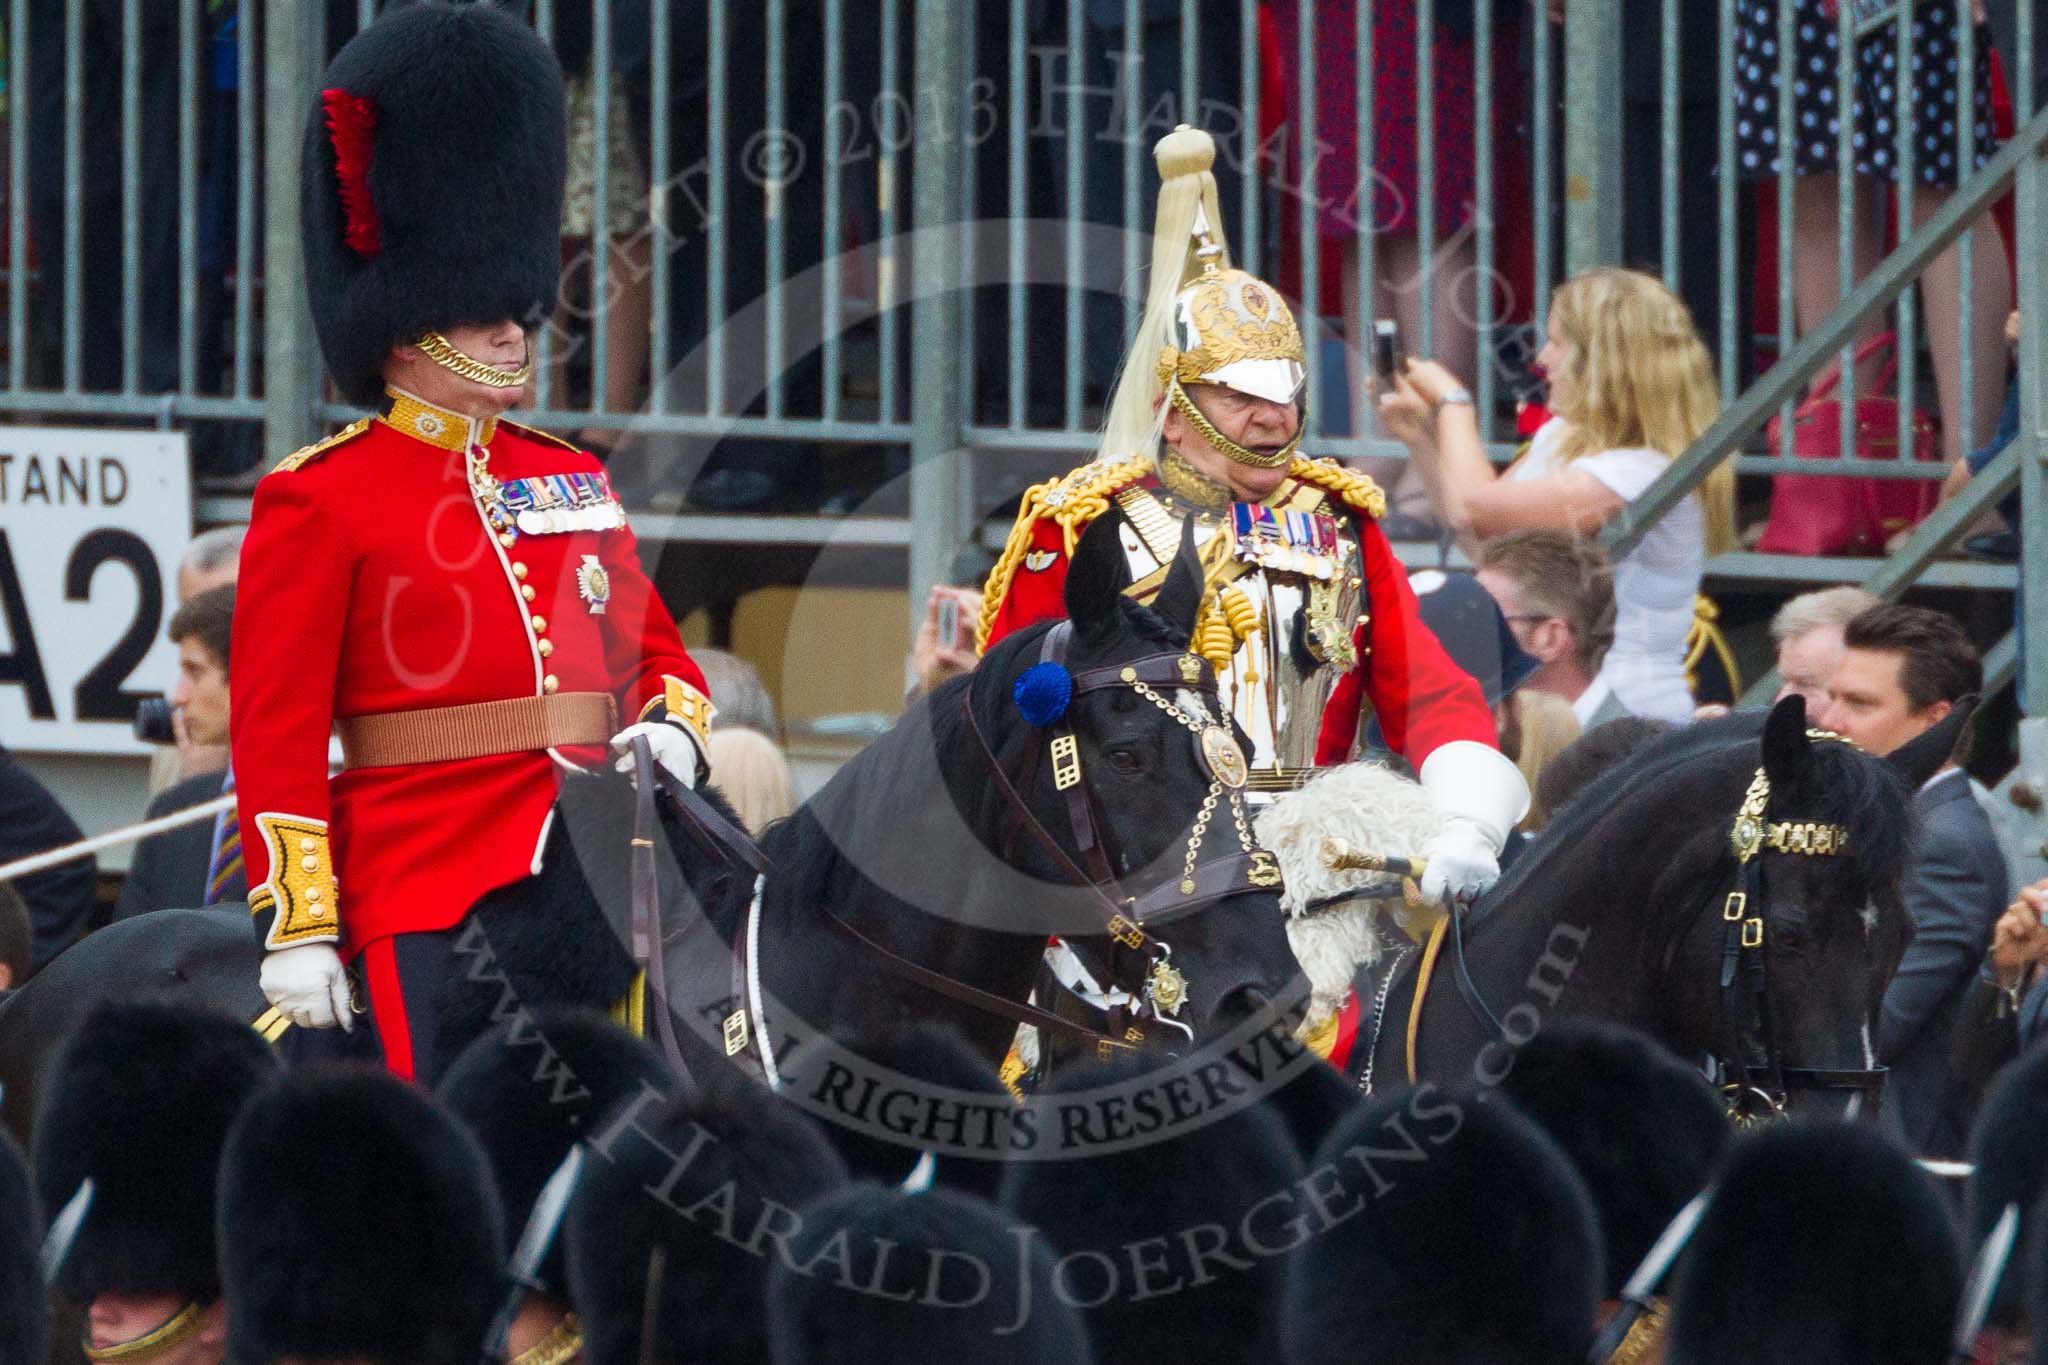 Trooping the Colour 2015. Image #245, 13 June 2015 10:59 Horse Guards Parade, London, UK